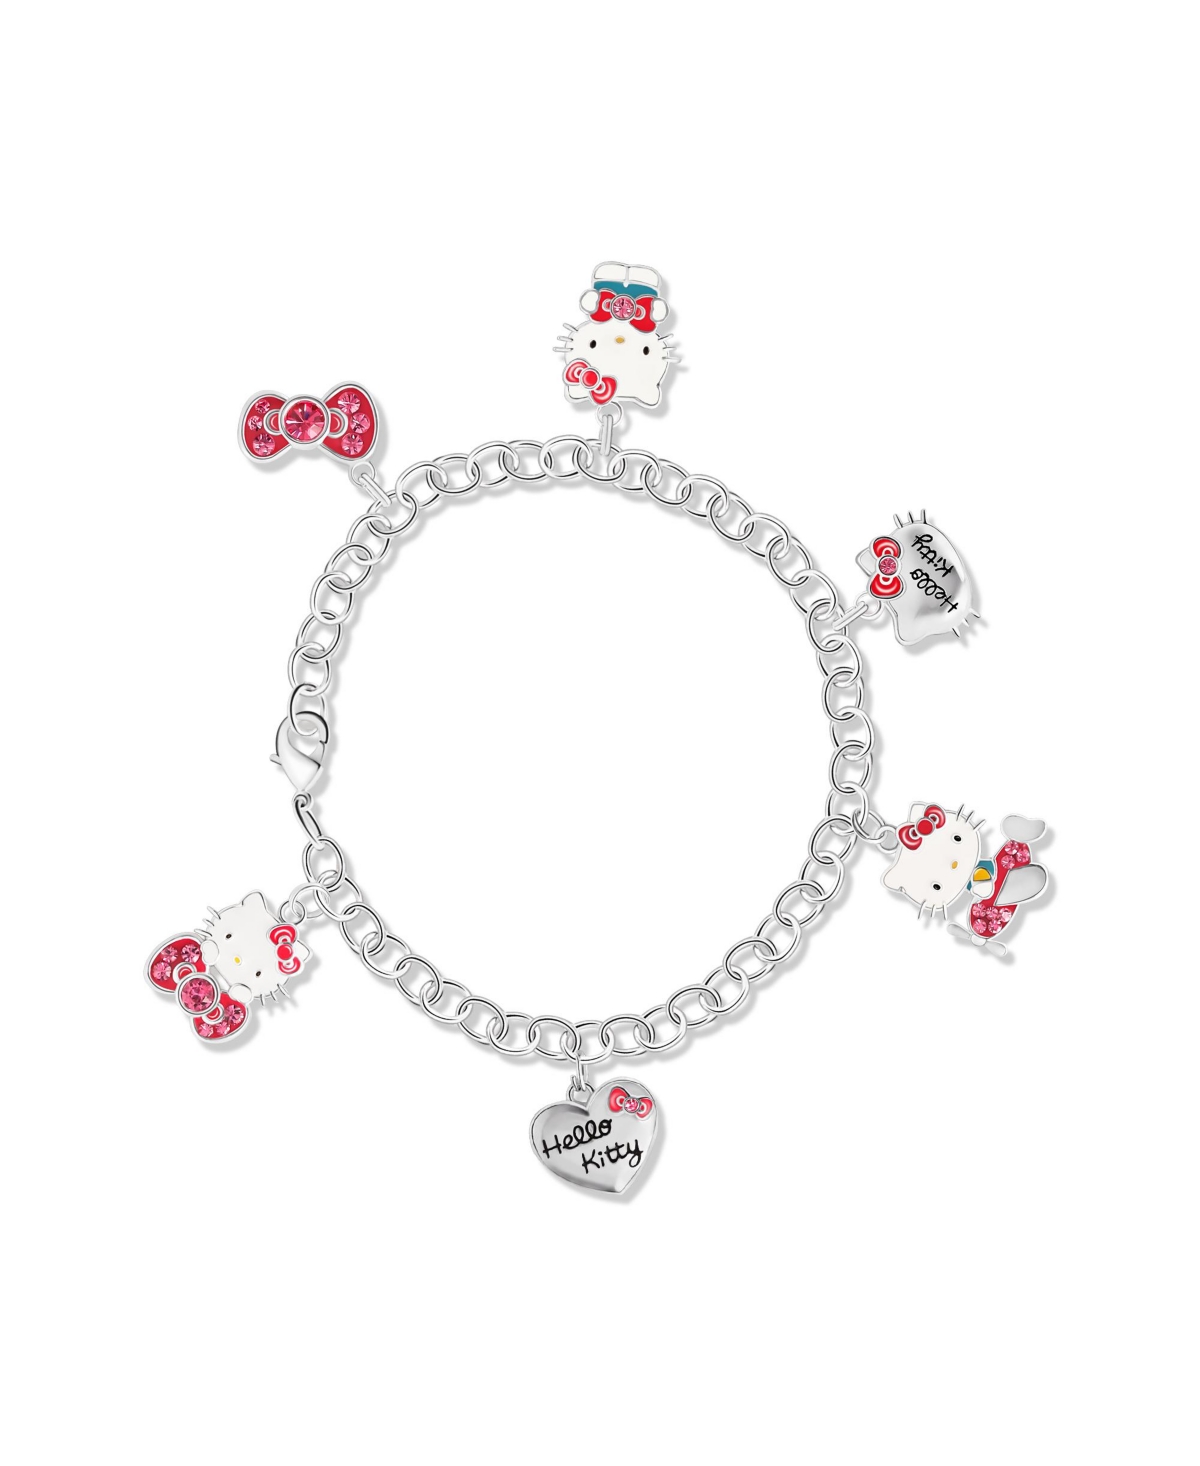 Sanrio Hello Kitty Officially Licensed Authentic Silver Plated Charm Bracelet - 8'' - Silver and pink